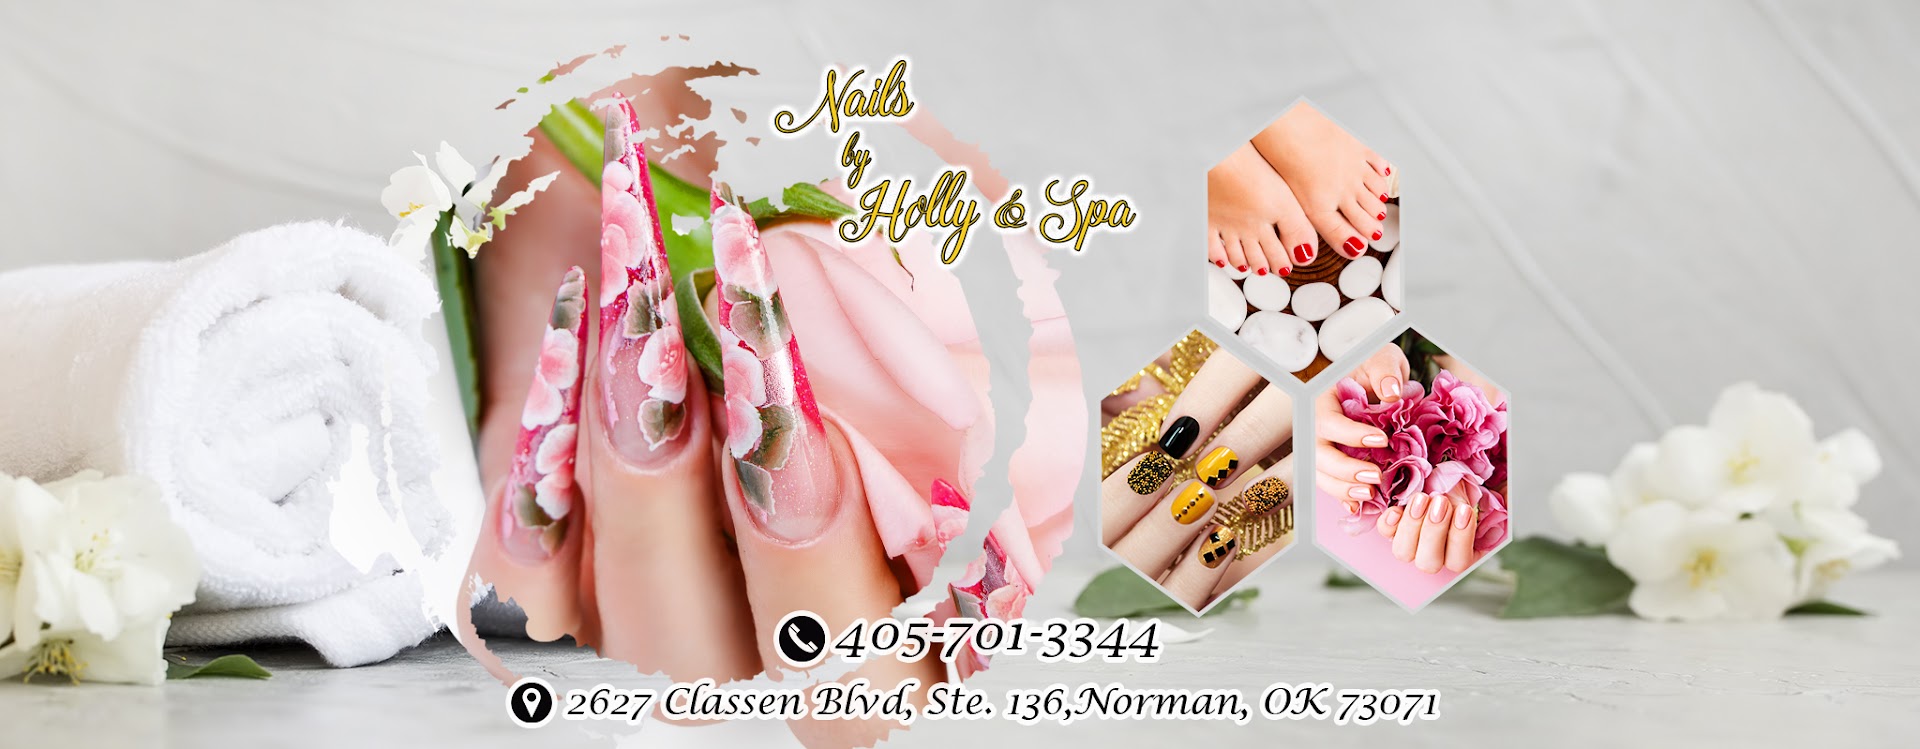 Nails By Holly & Spa